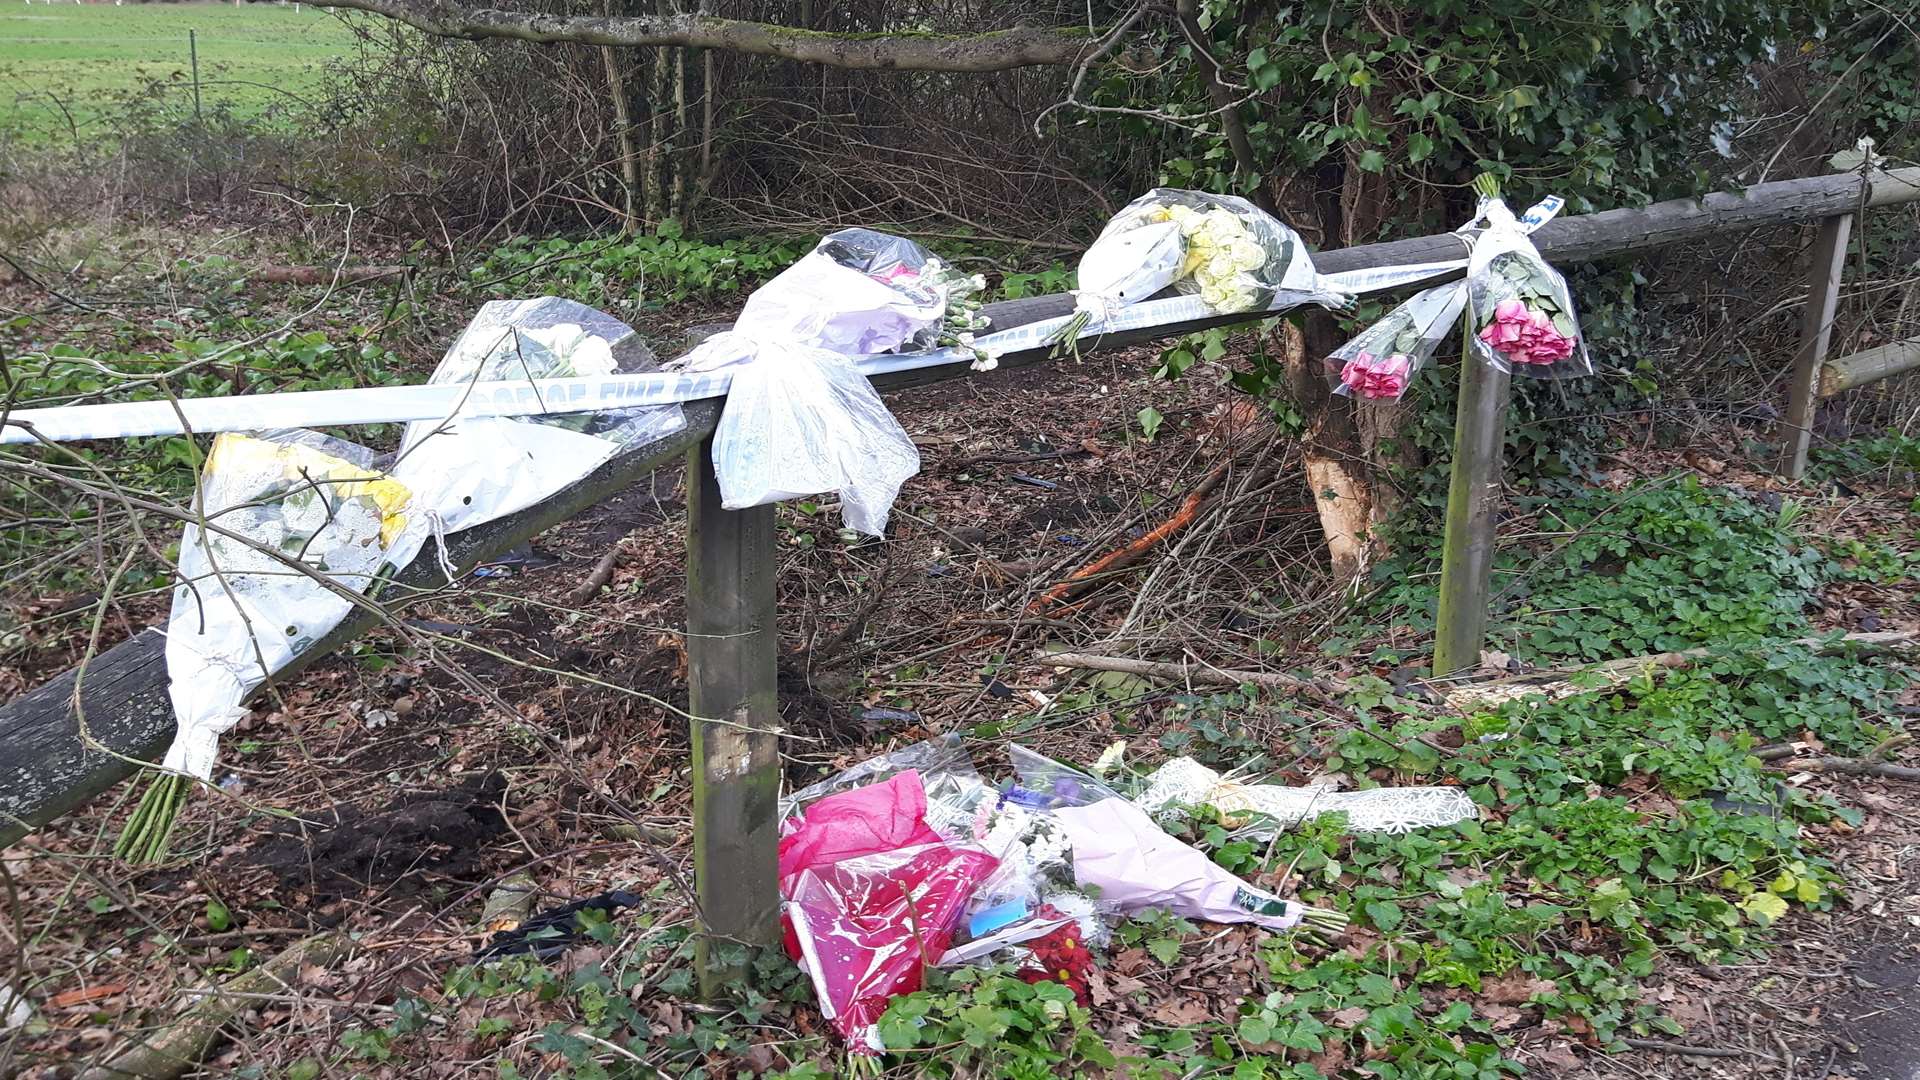 Flowers at the scene of the fatal crash